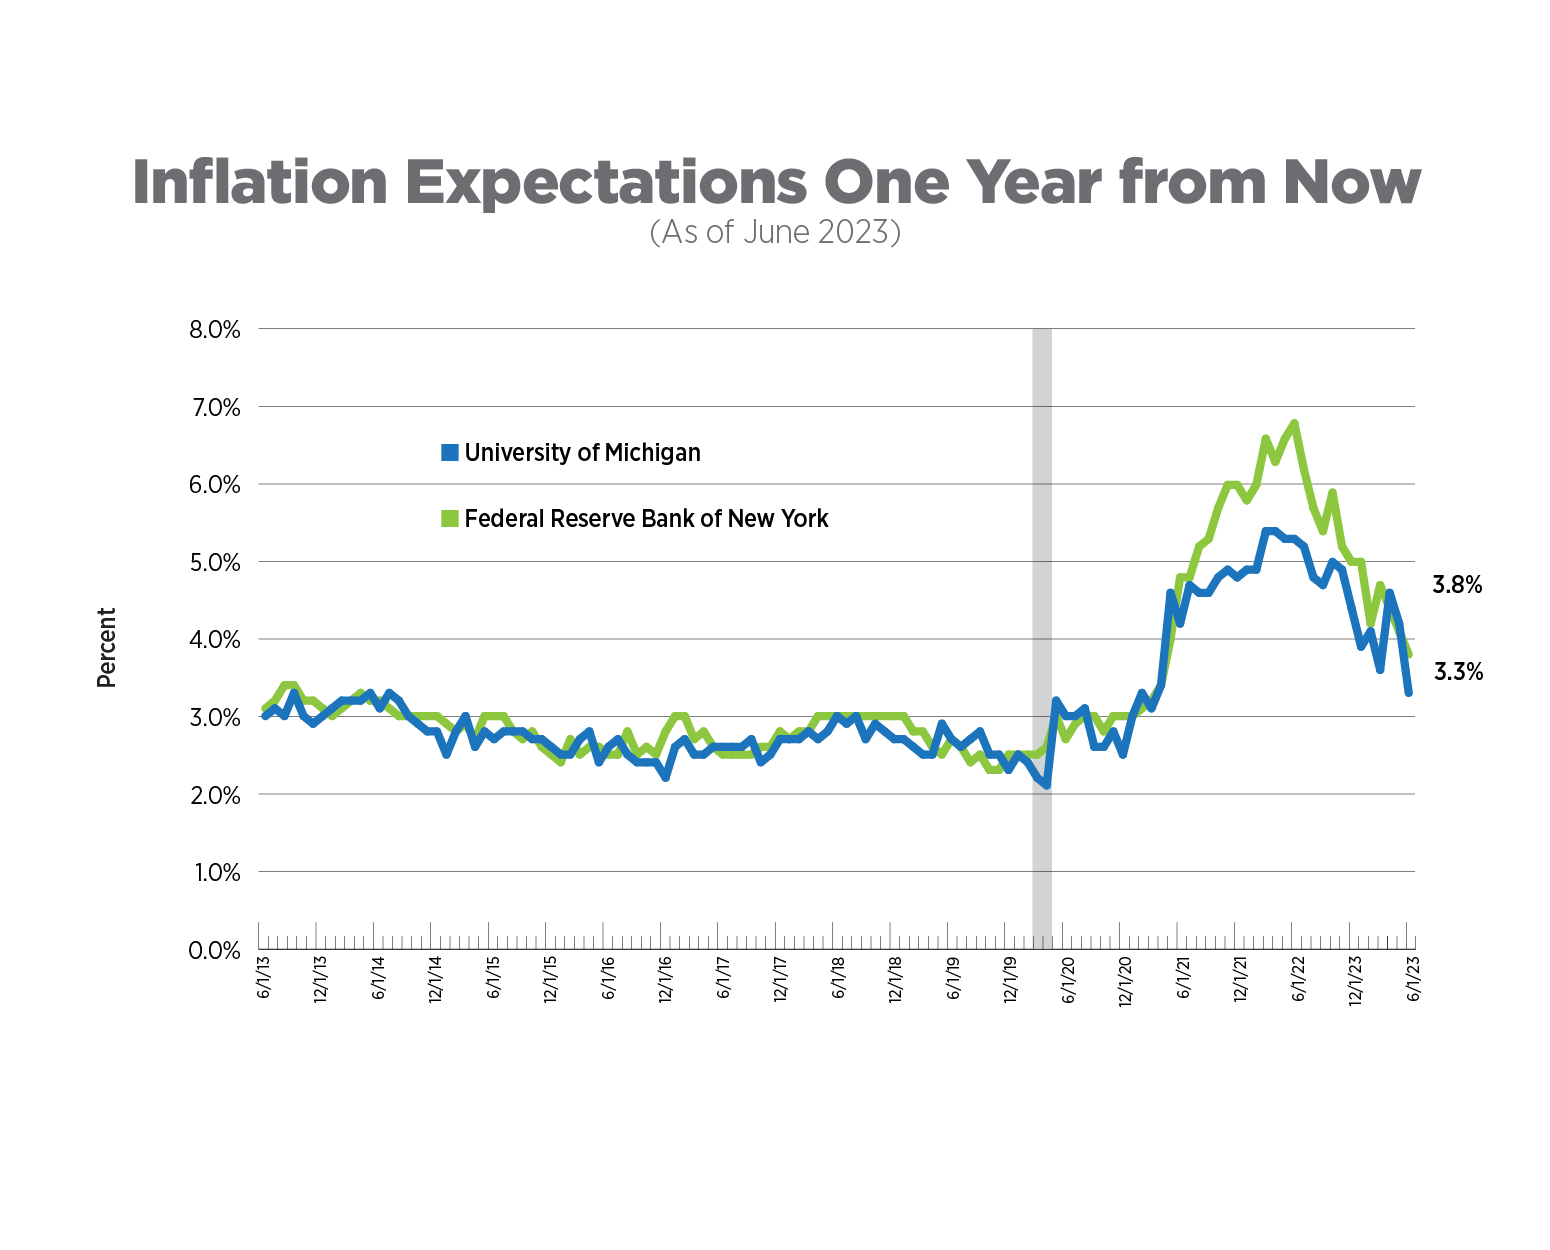 inflation expectations one year from now, as of june 2023